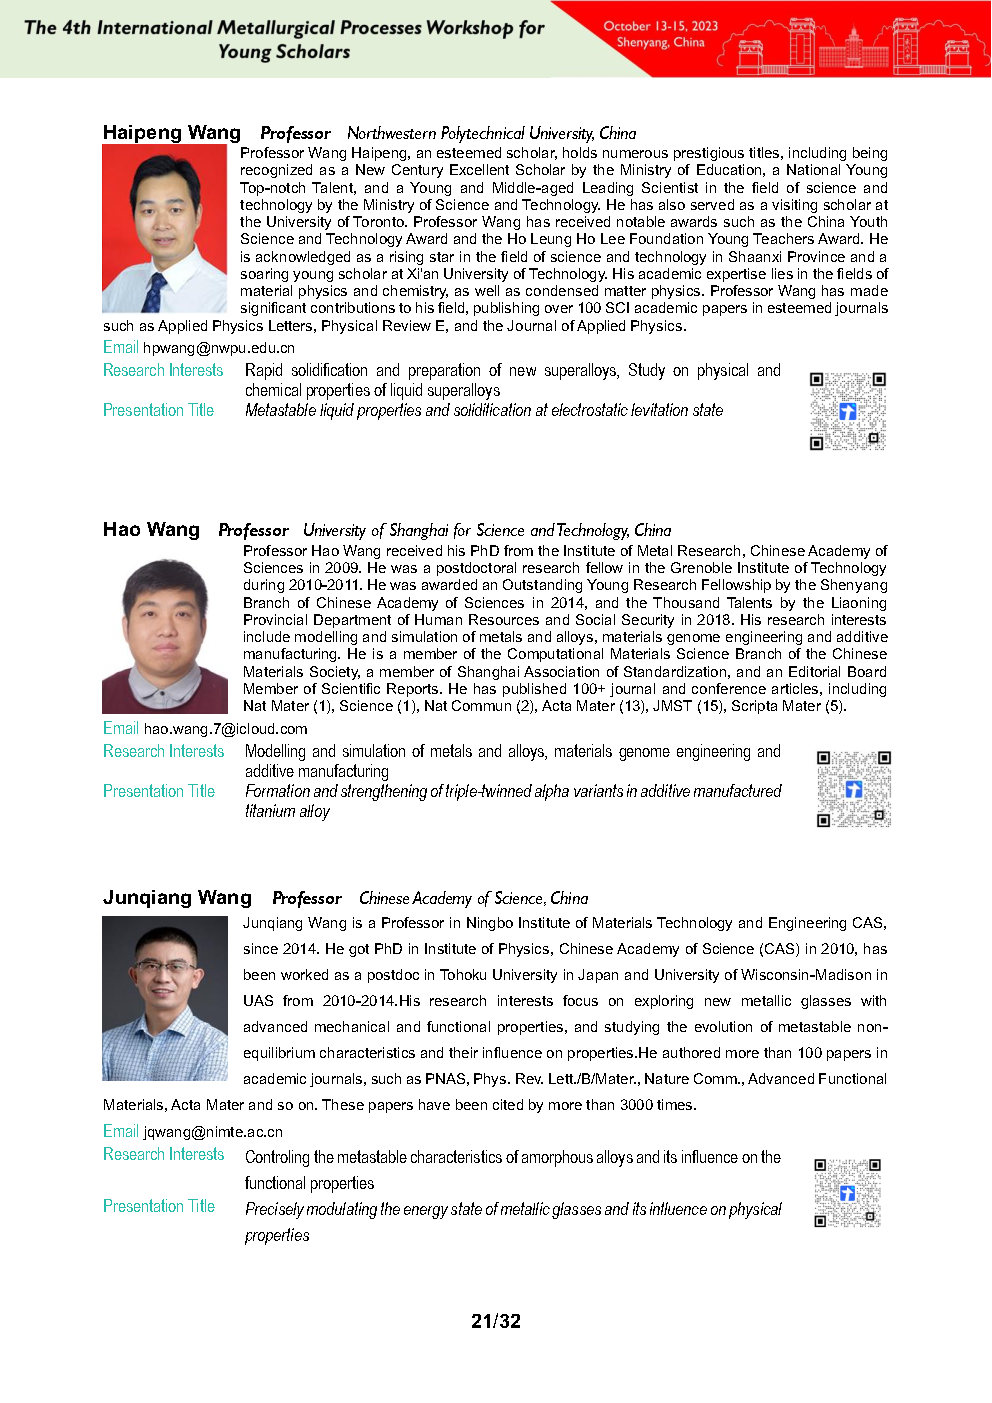 IMPROWYS Technical Program Presenters' Resume Page21